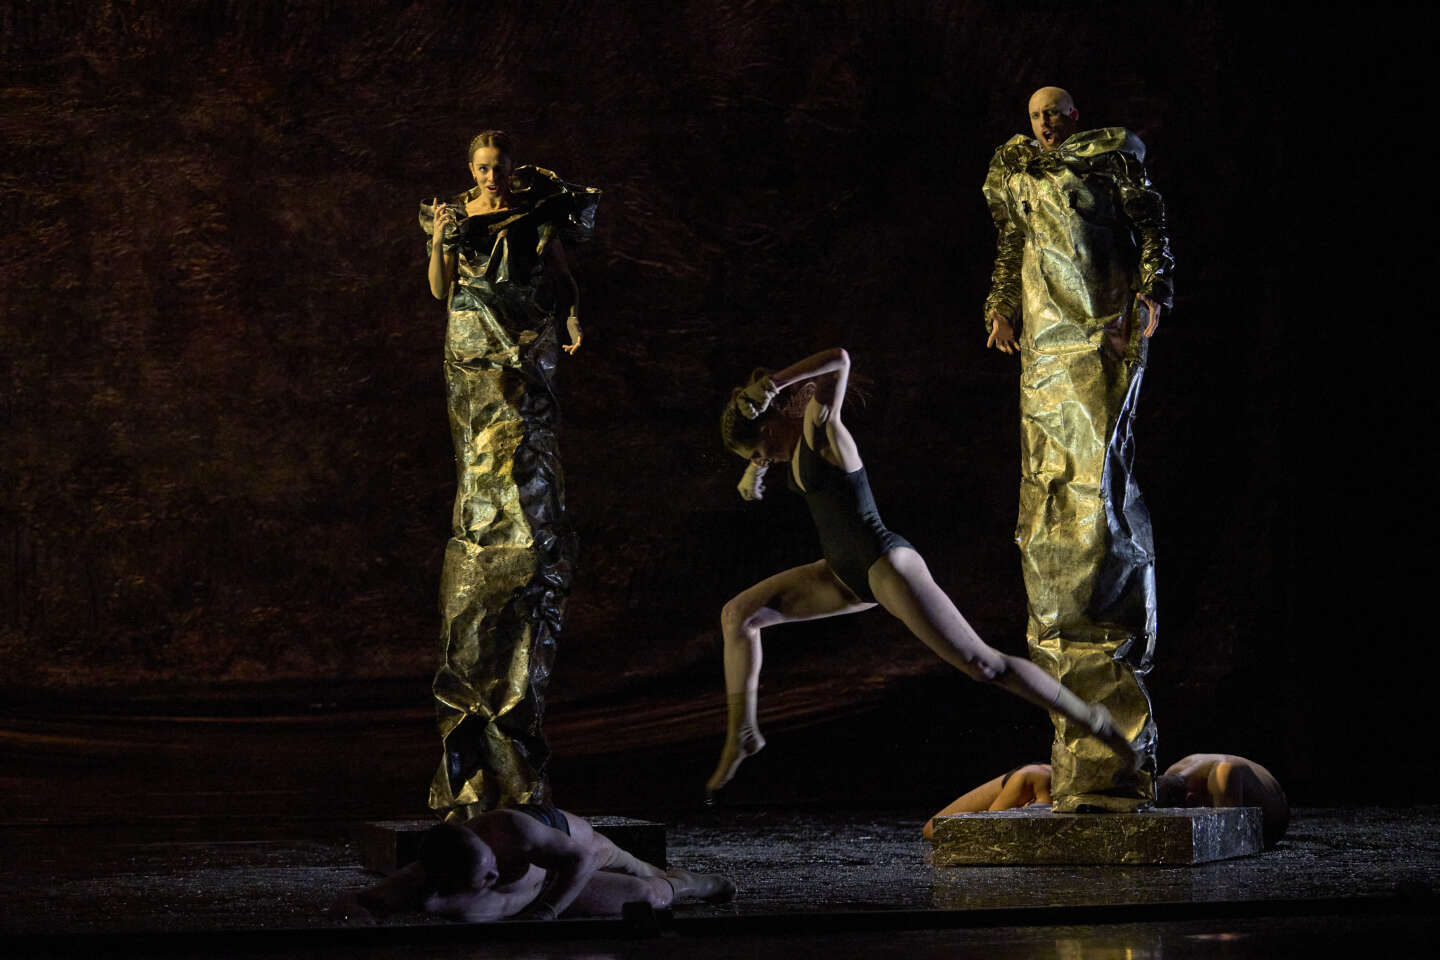 The opera “Dido and Aeneas”, directed by Blanca Li, shipwrecked from dance